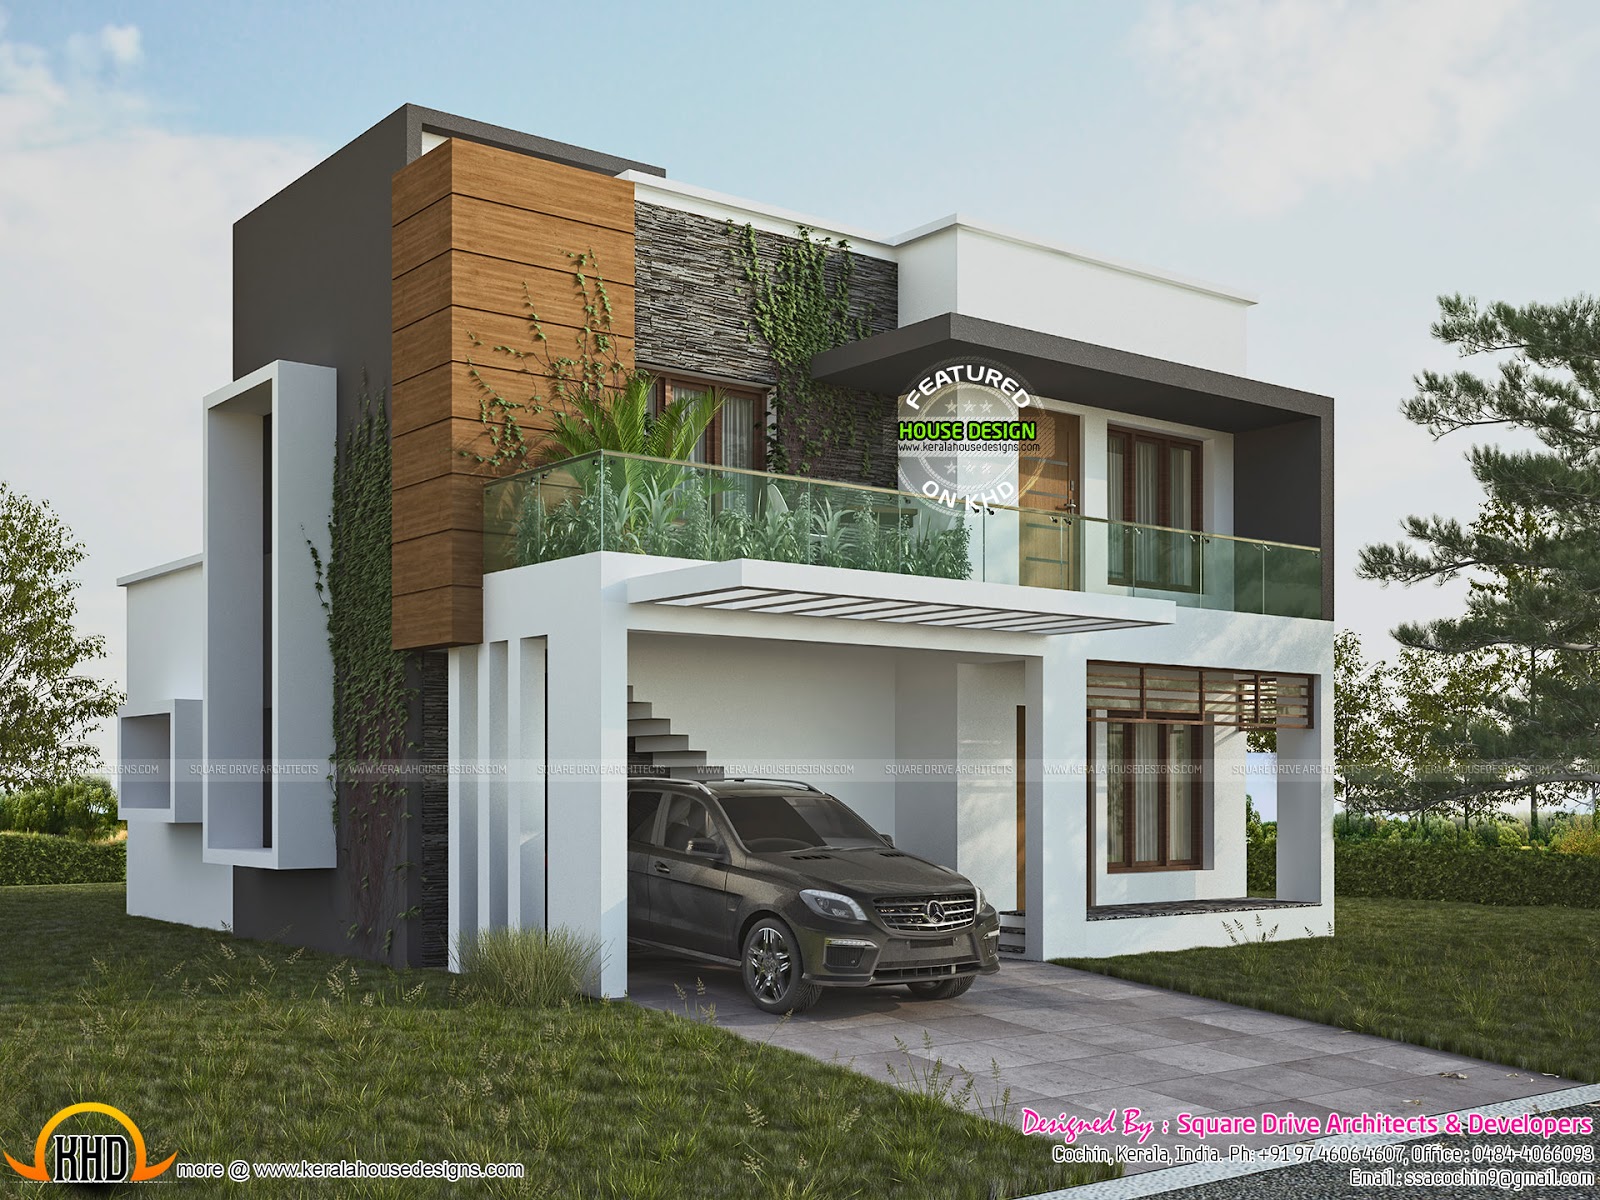 Green home contemporary style | Kerala home design | Bloglovin'  First floor : 1110 Sq.Ft. Total area : 2630 Sq.Ft. No. of bedrooms : 4. No.  of bathrooms : 4. Design style : Green home contemporary style